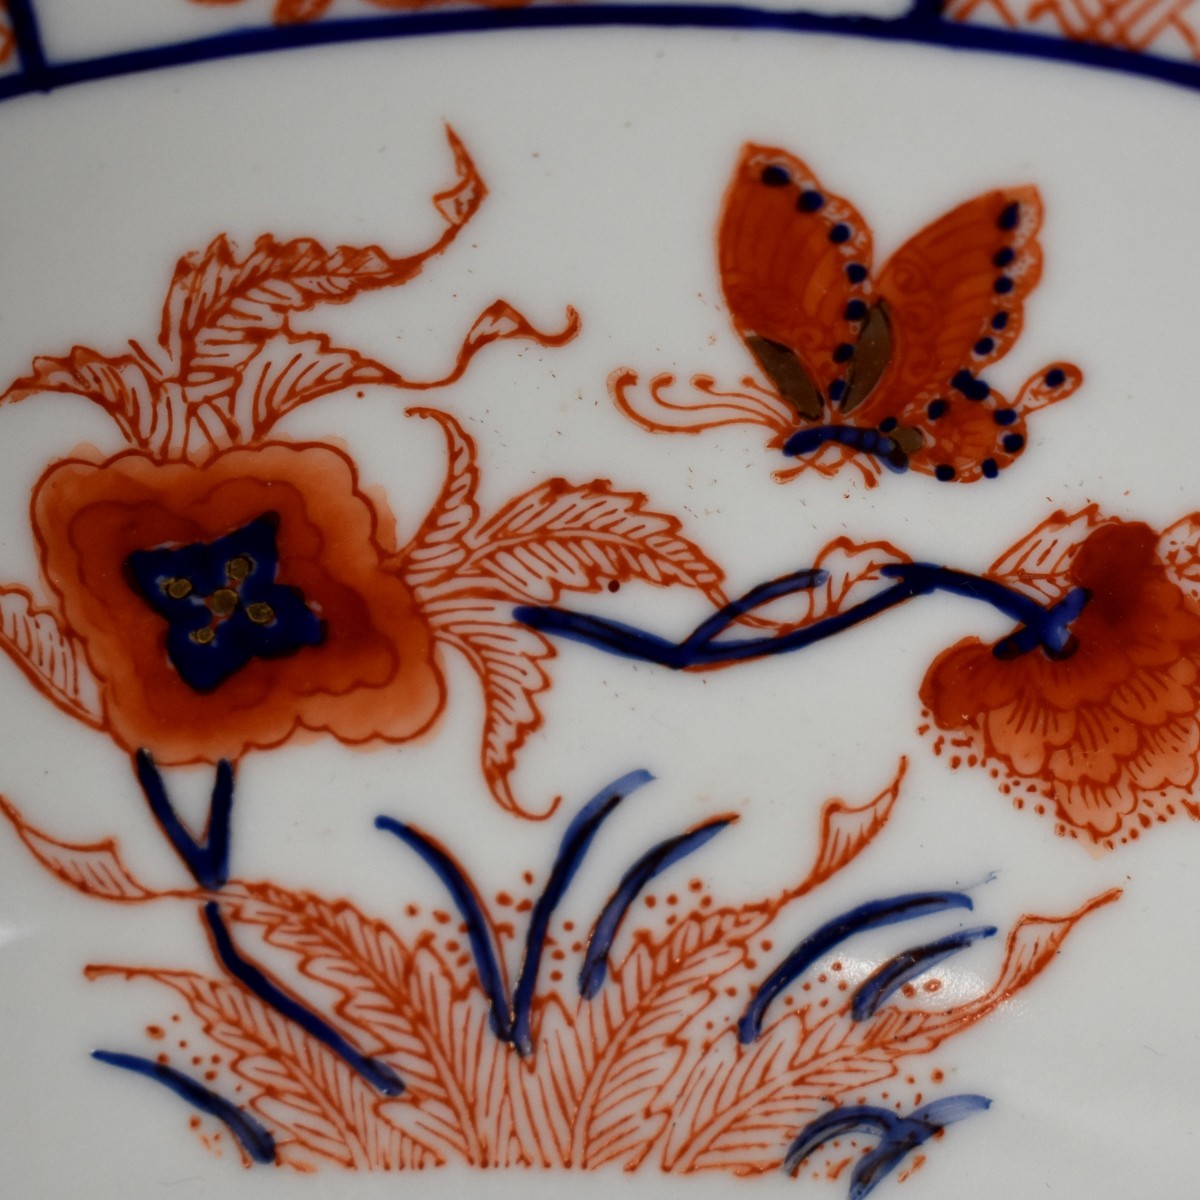 Chinese Bowl and Box Tableware